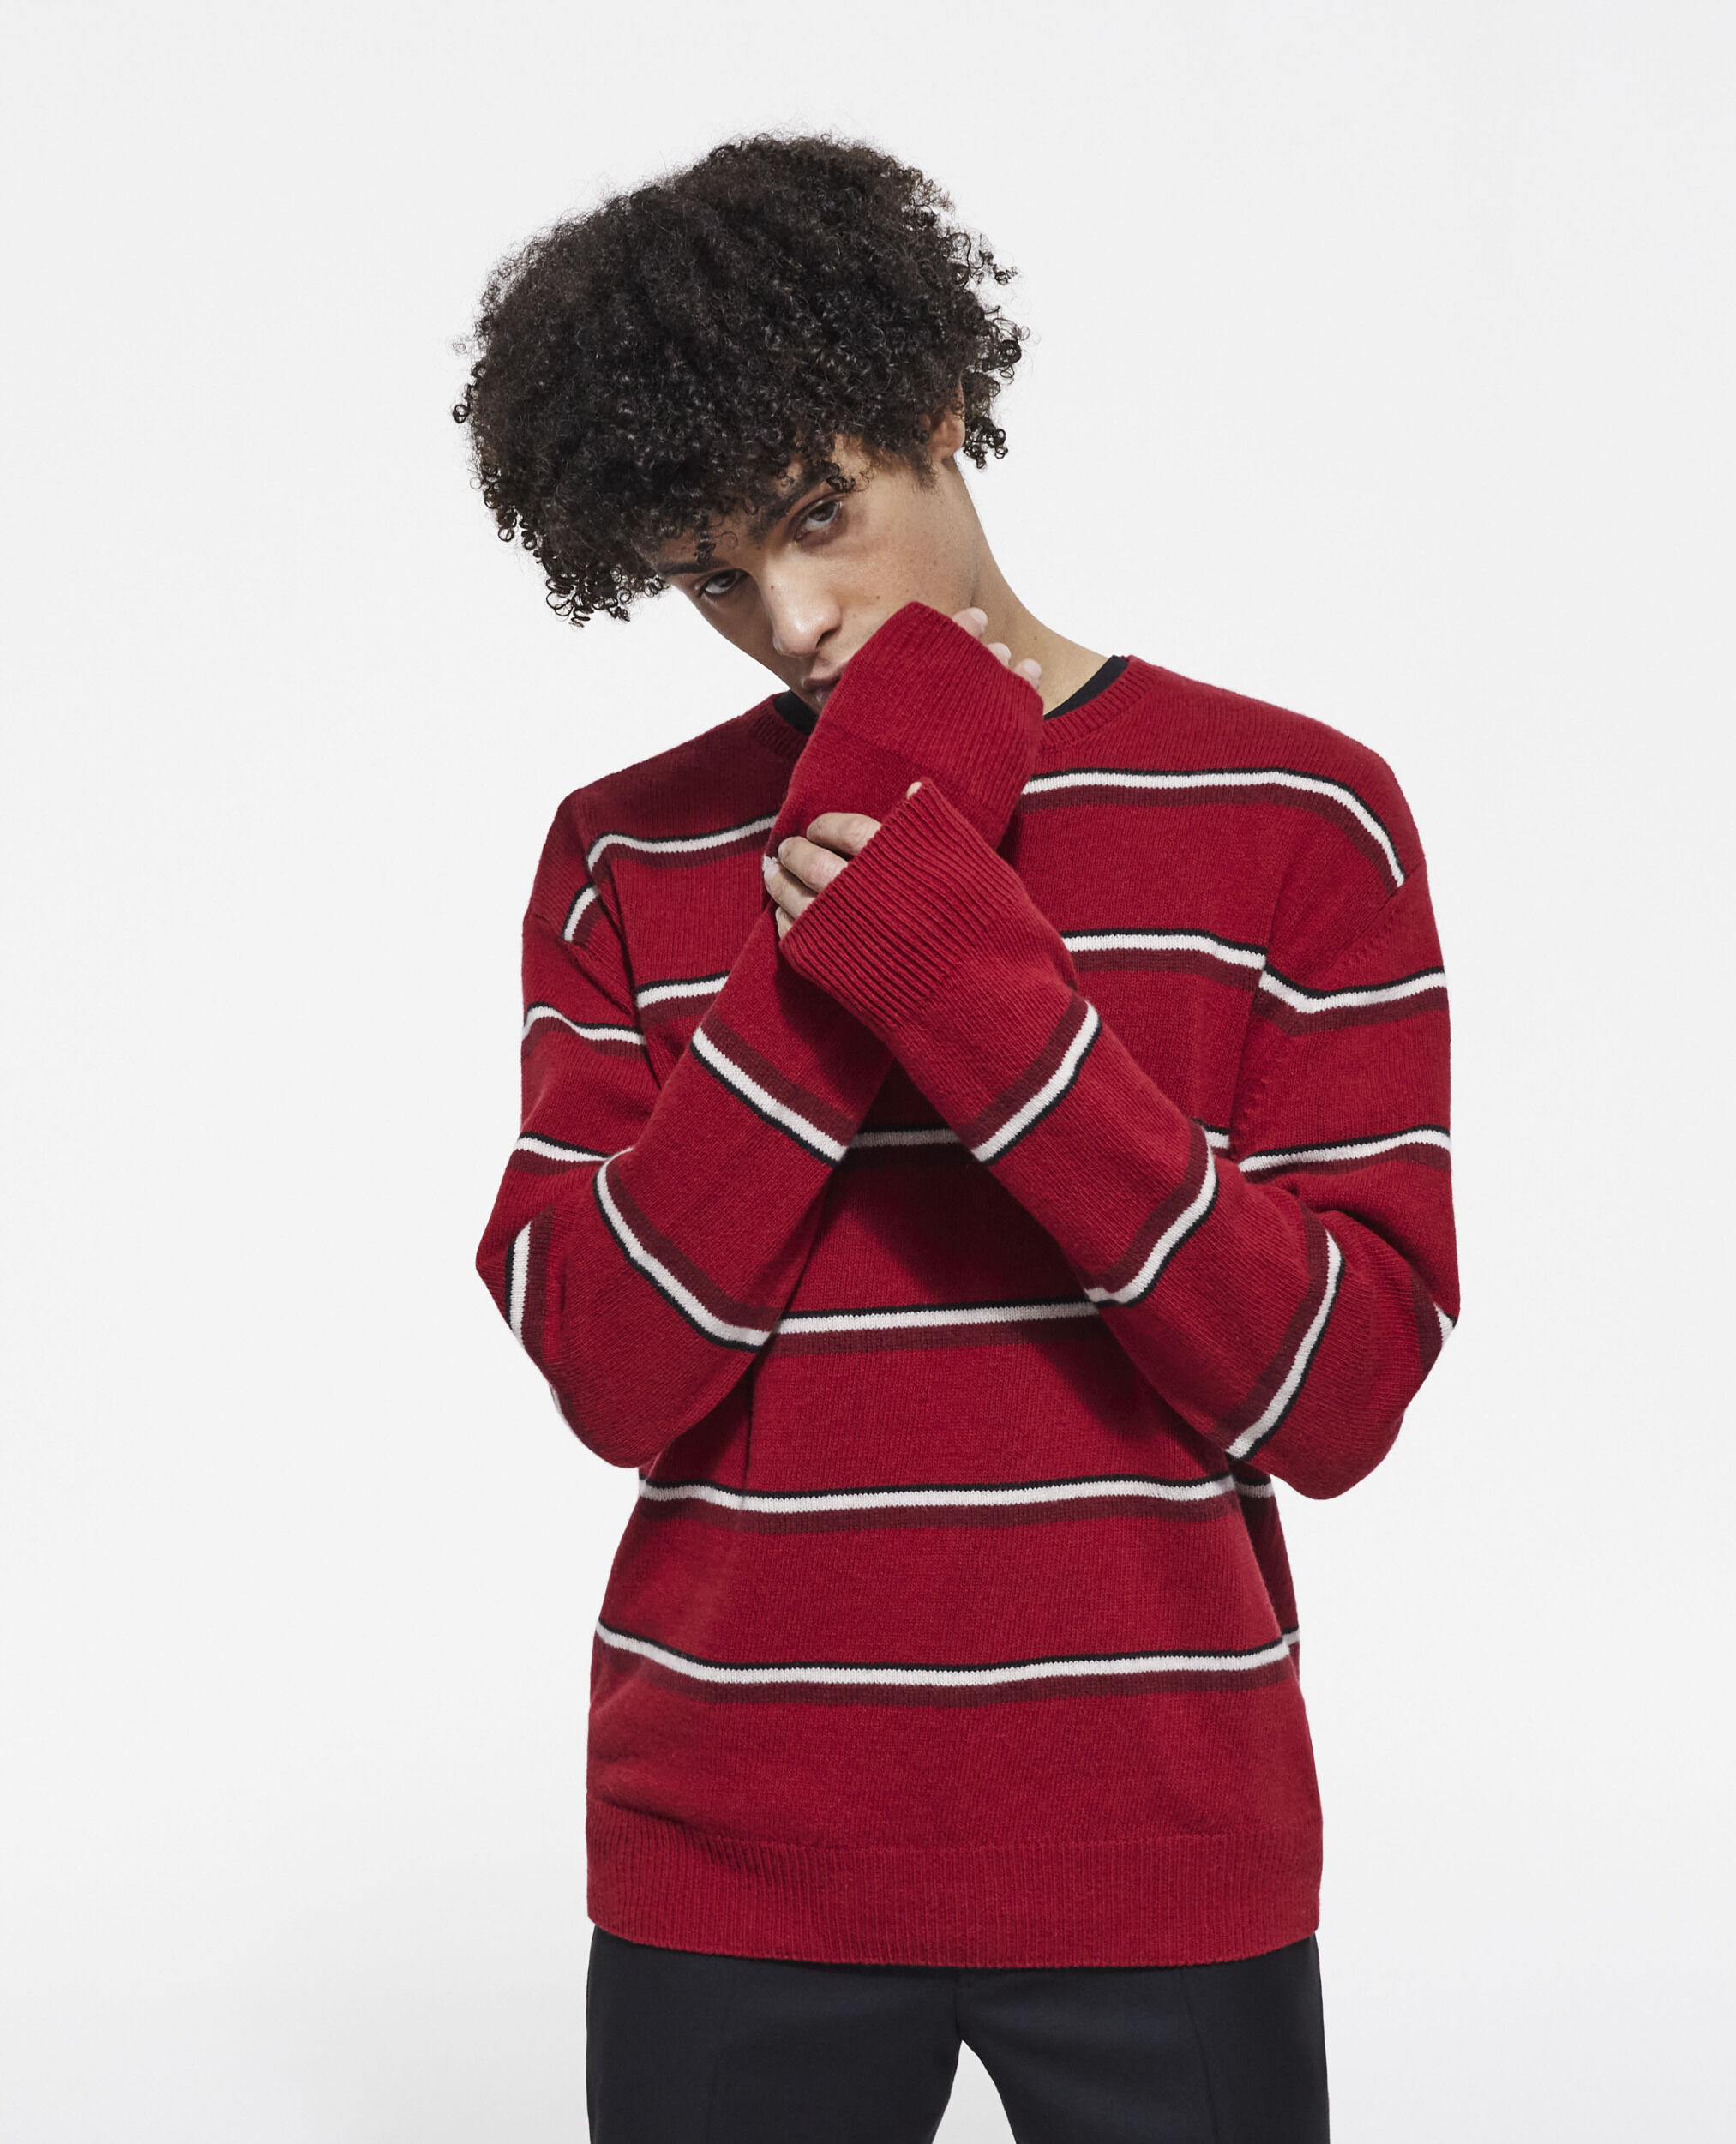 Multicolored cashmere sweater, RED-BLACK-WHITE, hi-res image number null